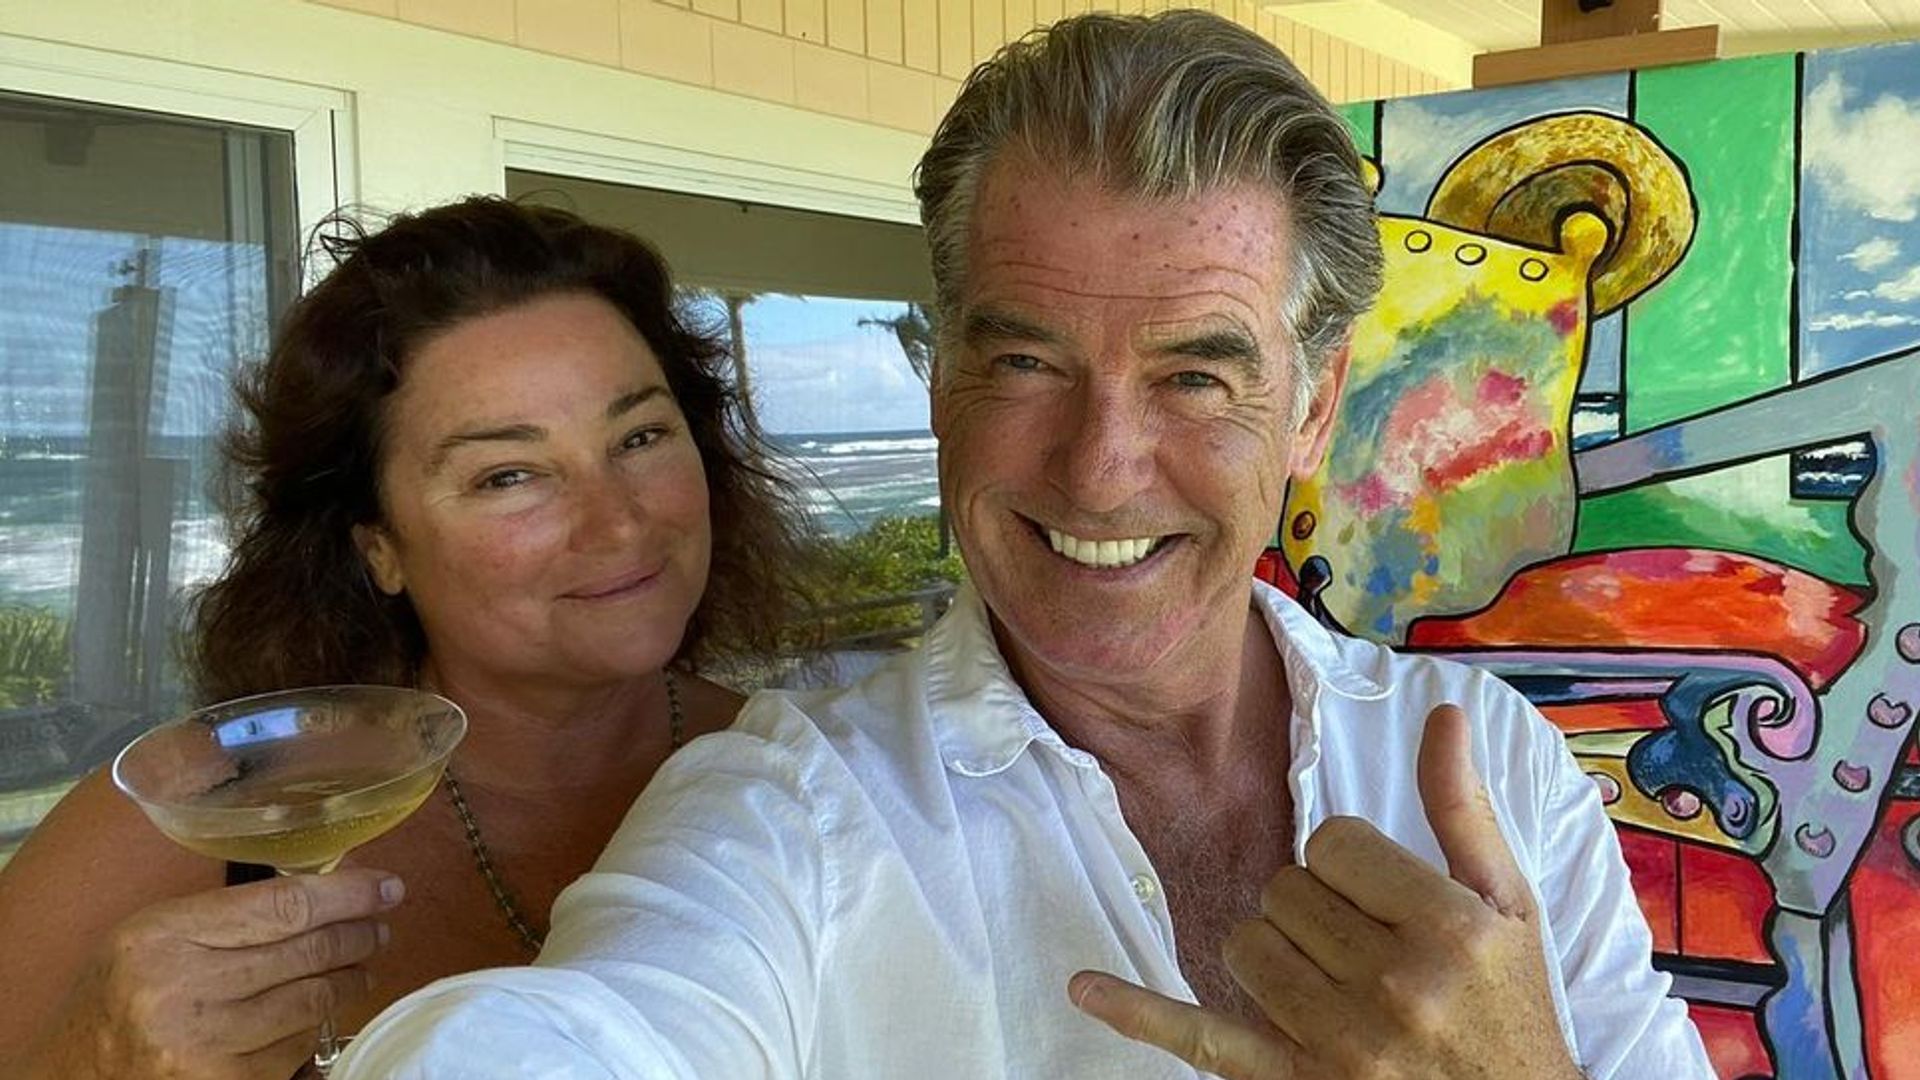 Pierce Brosnan's wife Keely, 60, poses in radiant sheer dress for at home celebration